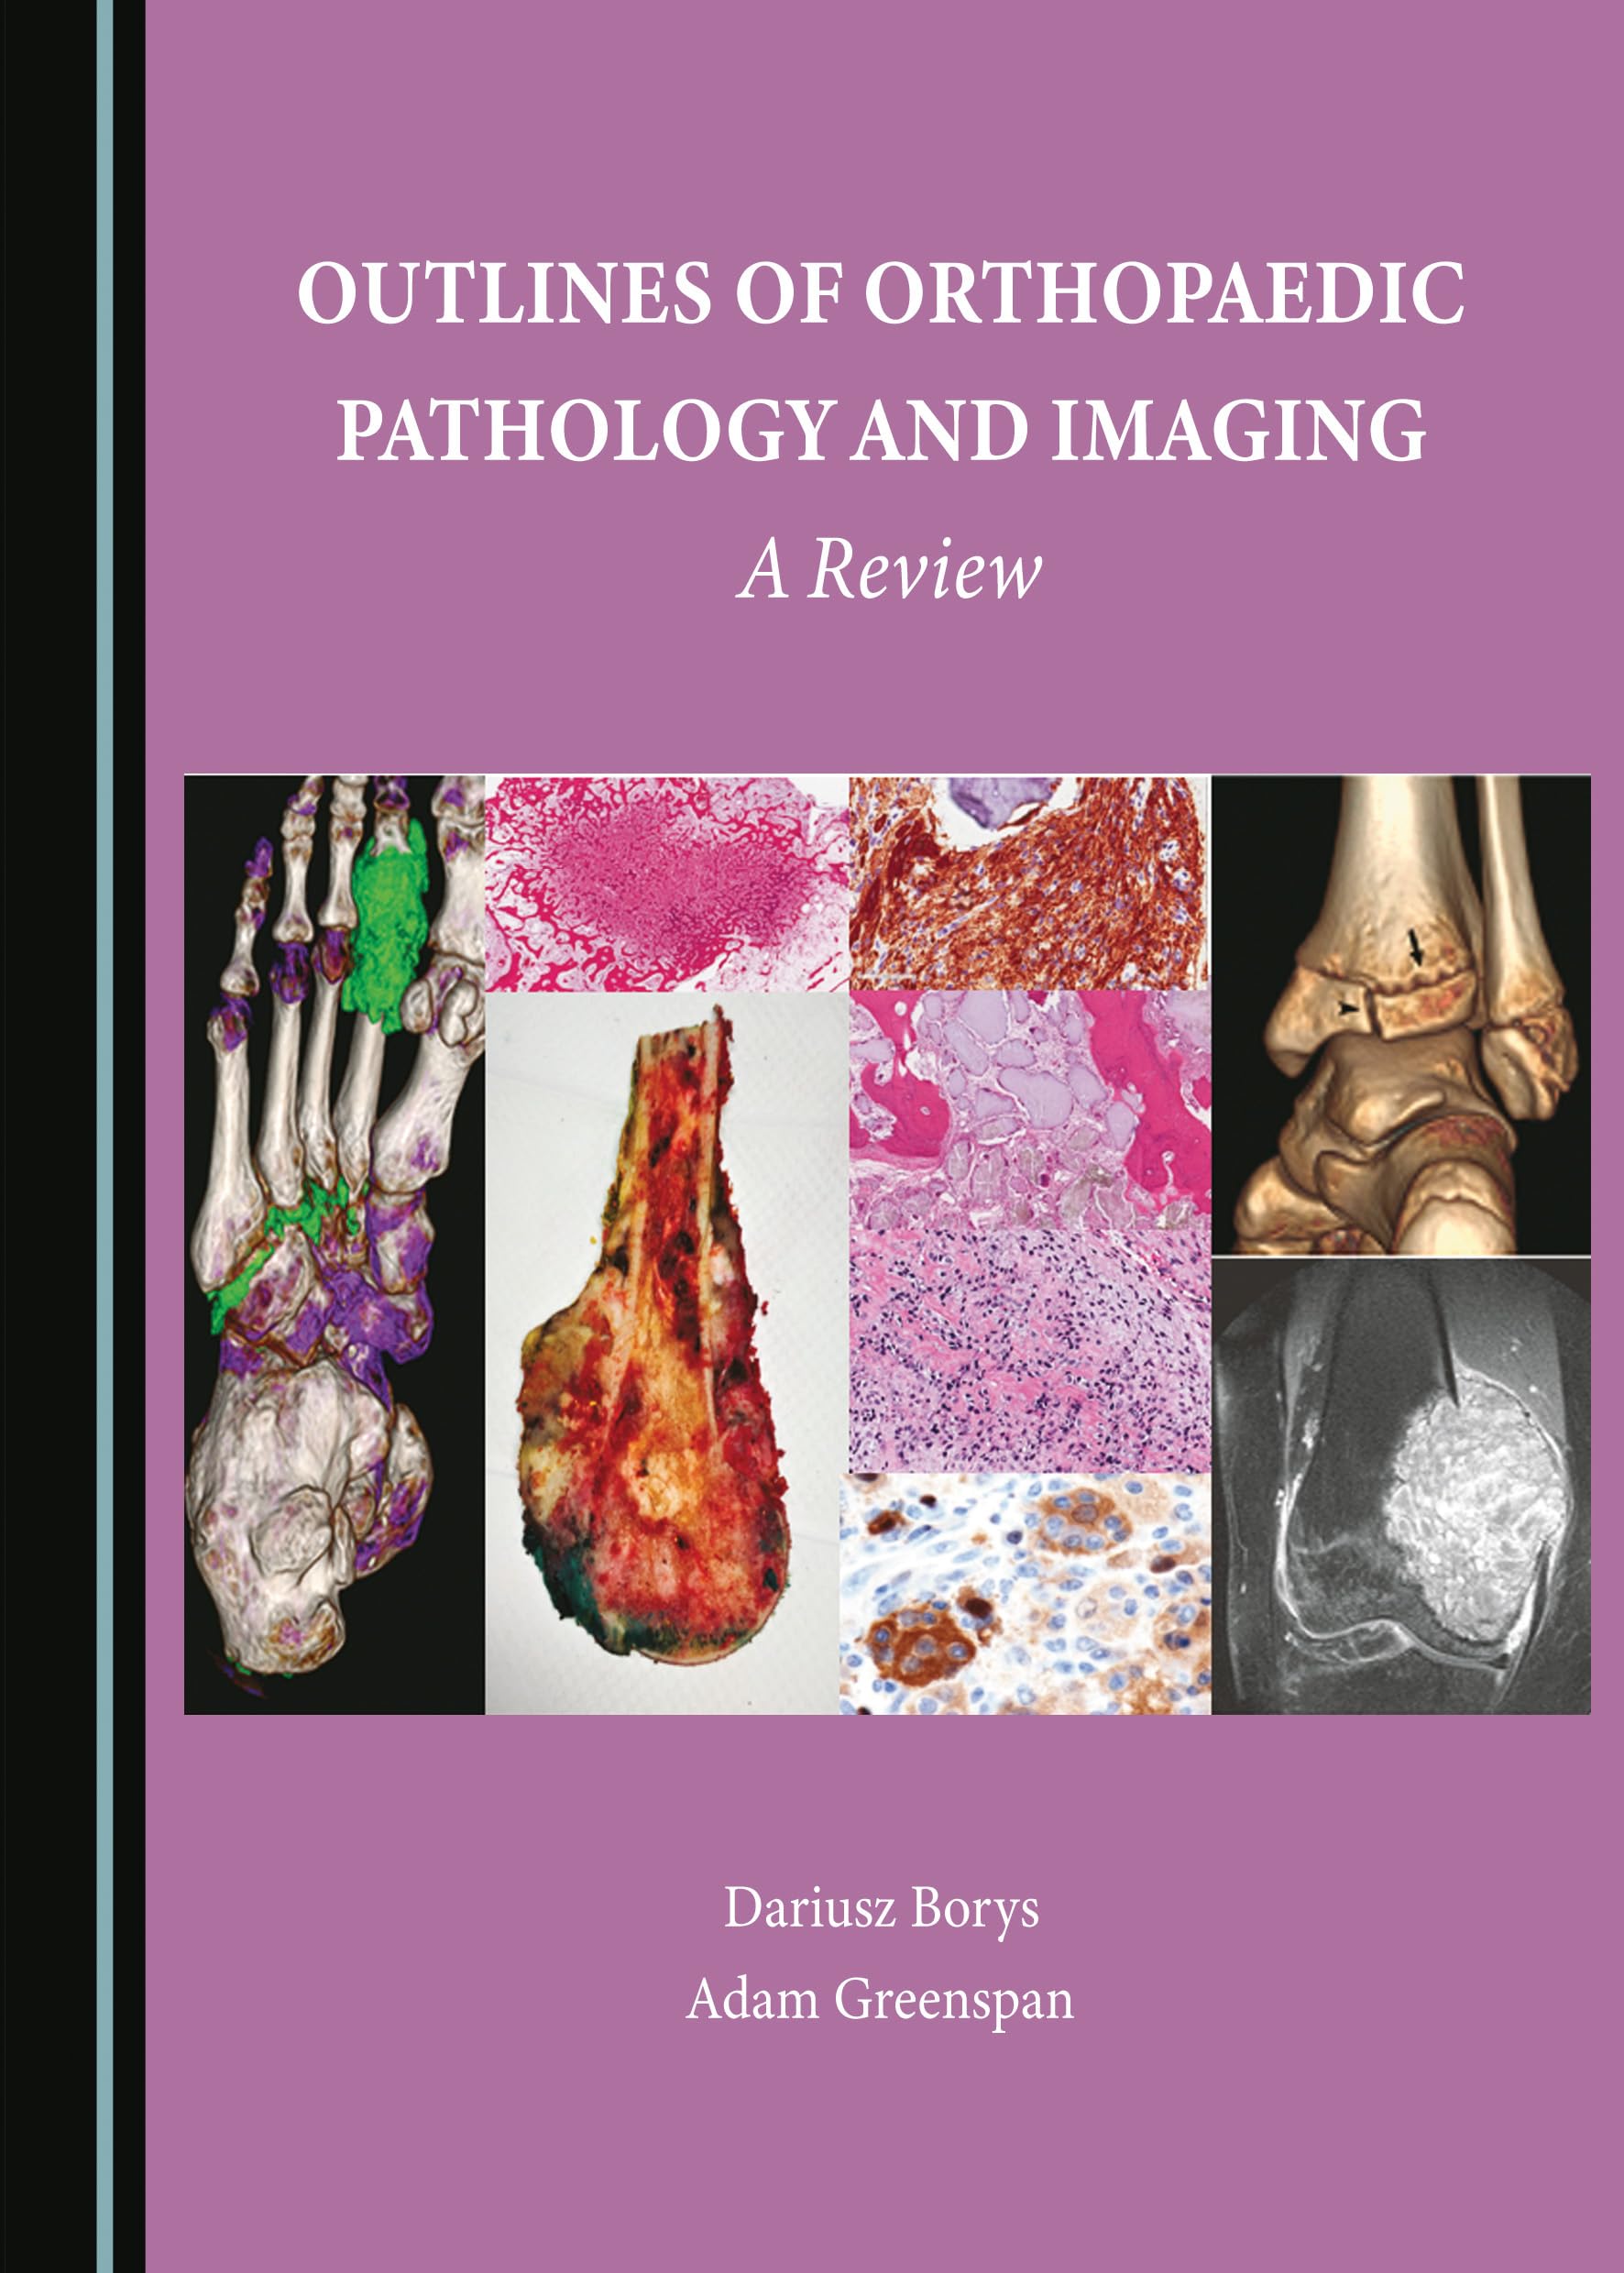 Outlines of Orthopaedic Pathology and Imaging: A Review by Dariusz Borys 